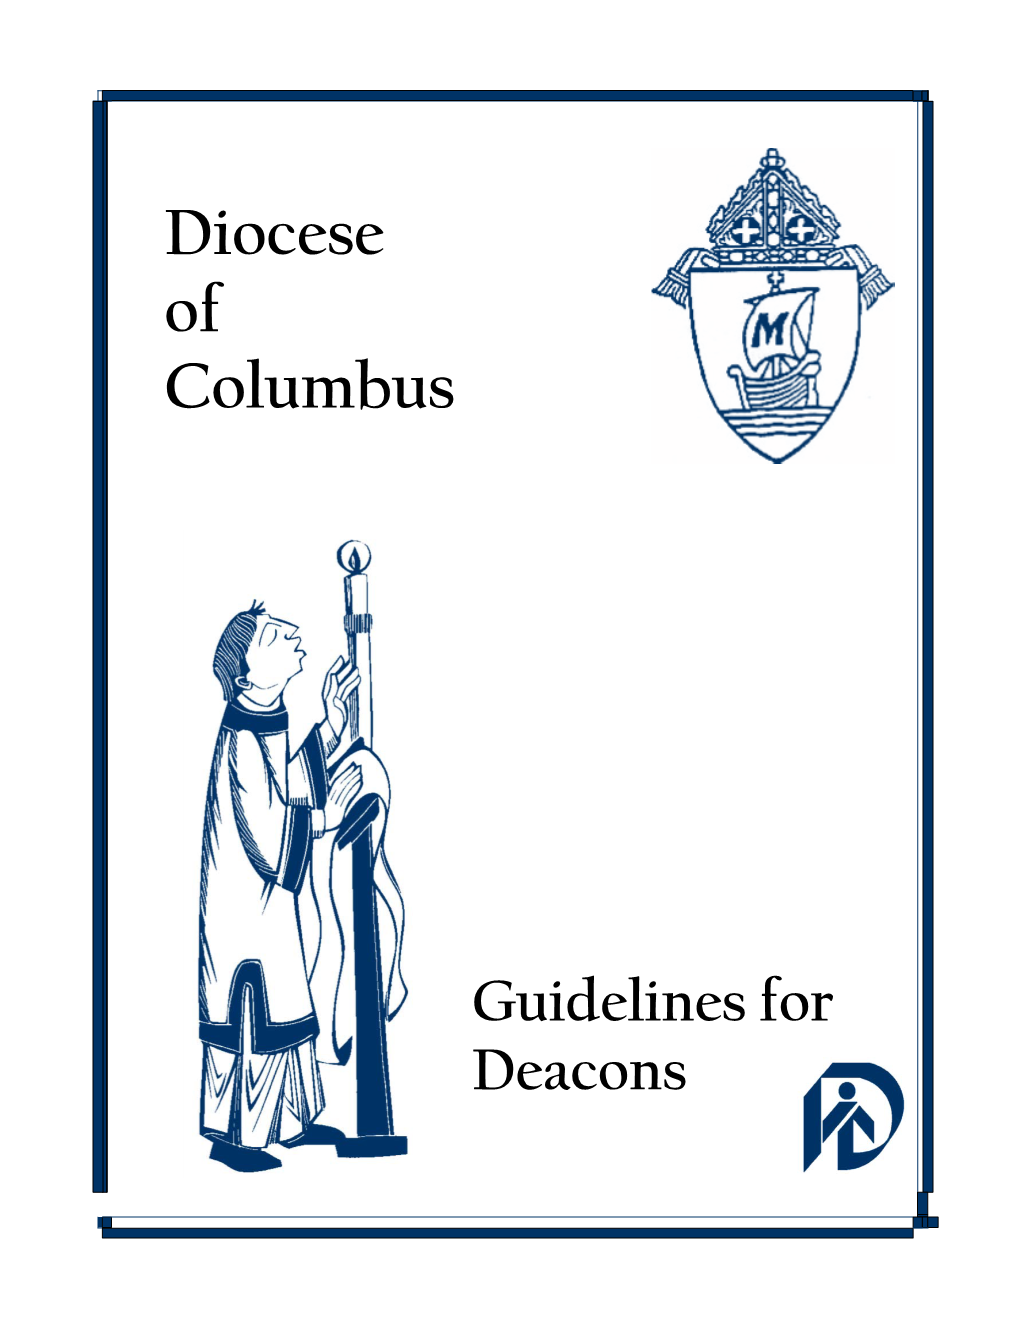 Guidelines for Deacons GUIDELINES for DEACONS in the DIOCESE of COLUMBUS